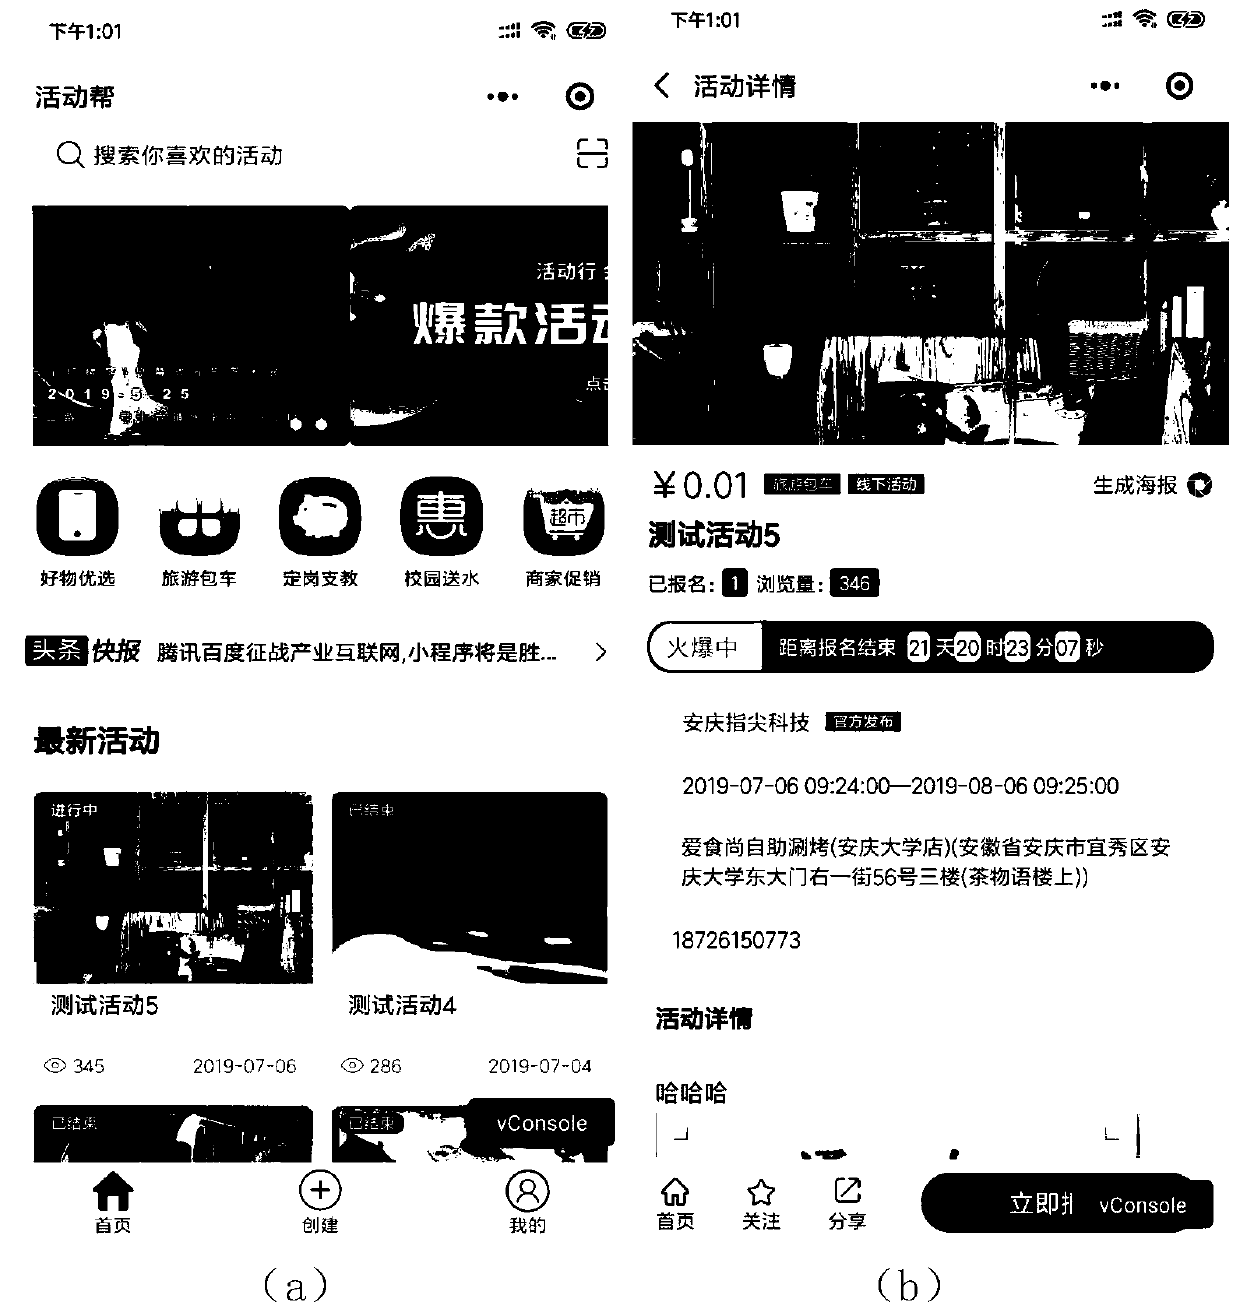 Display method based on WeChat applet and activity